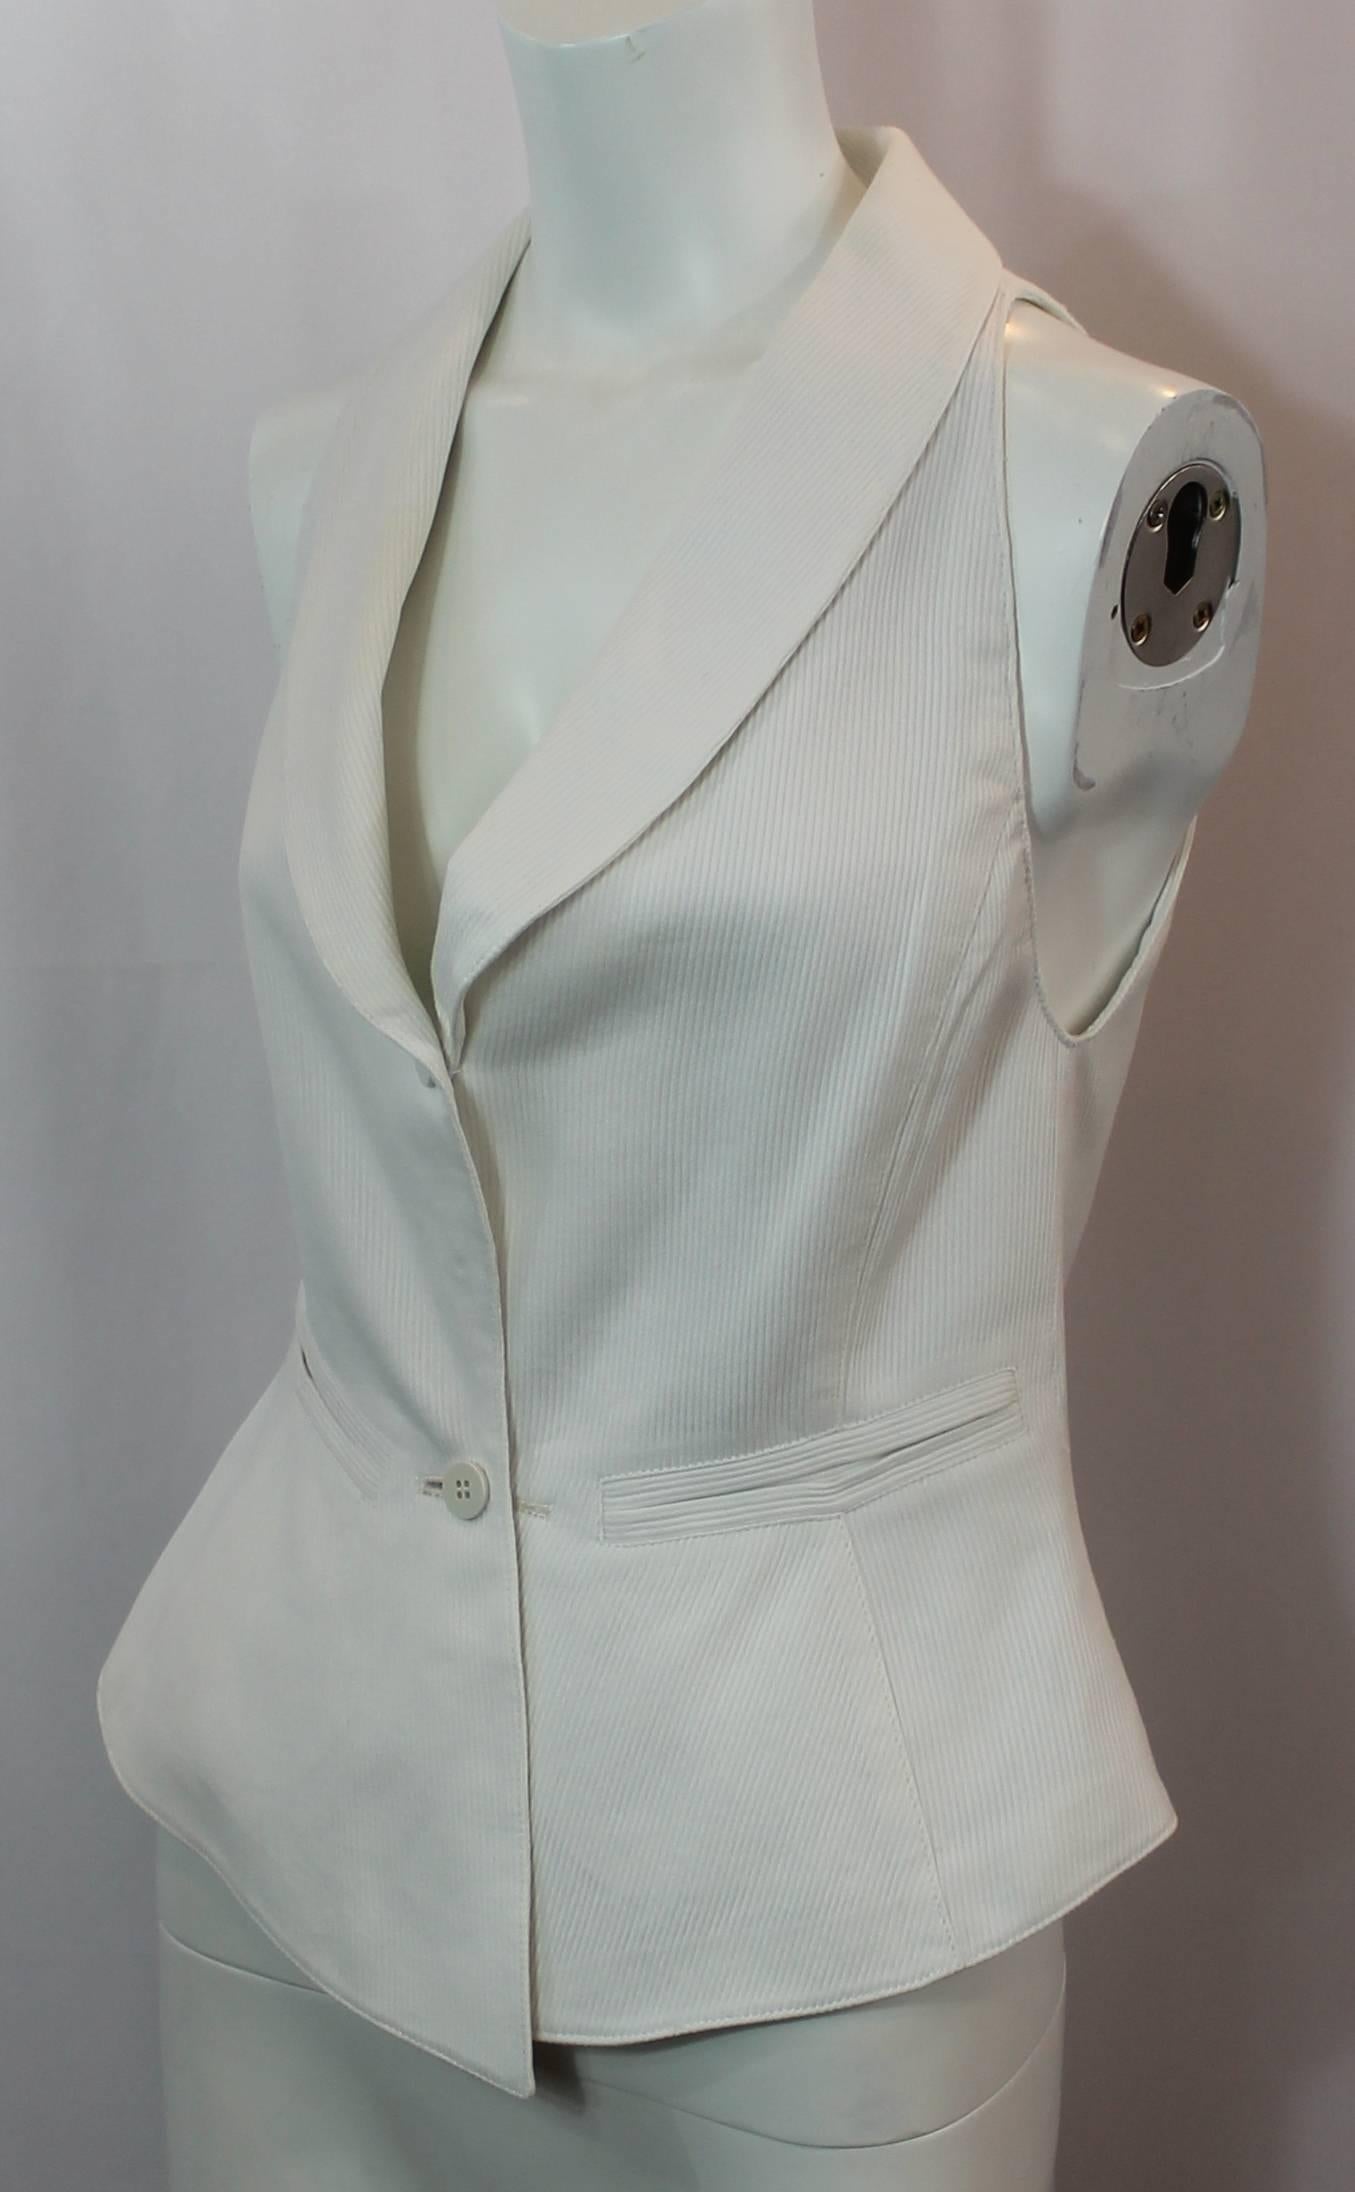 Claude Montana White Cotton Tuxedo Style Vest - S - 1980's. This vest is in excellent vintage condition with minor wear consistent with its age; mainly that some threads are starting to loosen on the edges of the garment. The vest features a ribbed